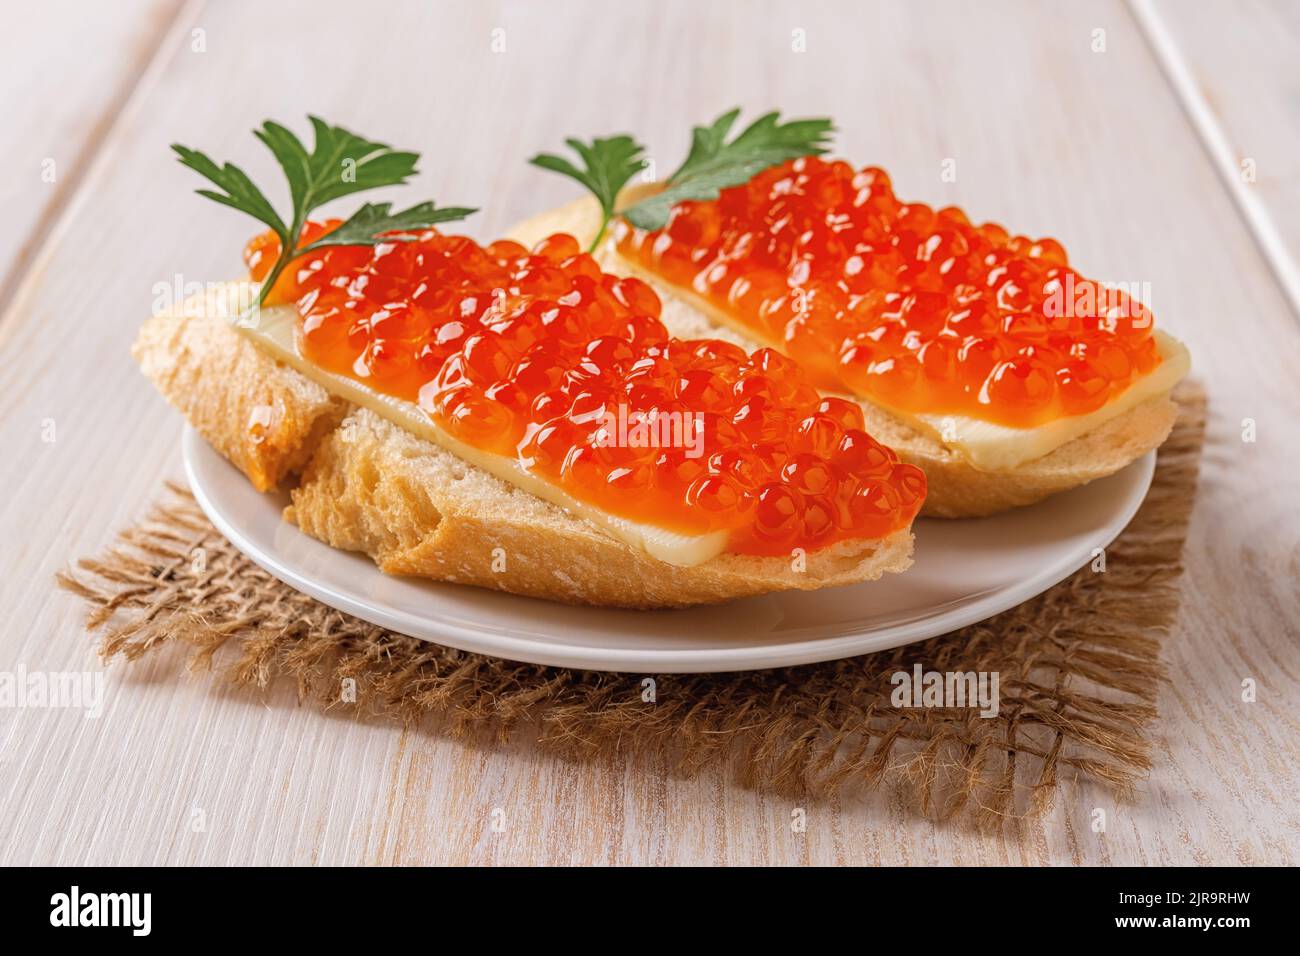 Two sandwiches with red caviar on a saucer over wooden table. Gourmet appetizer of trout caviar on a french baguette slice with butter.  Close-up. Stock Photo